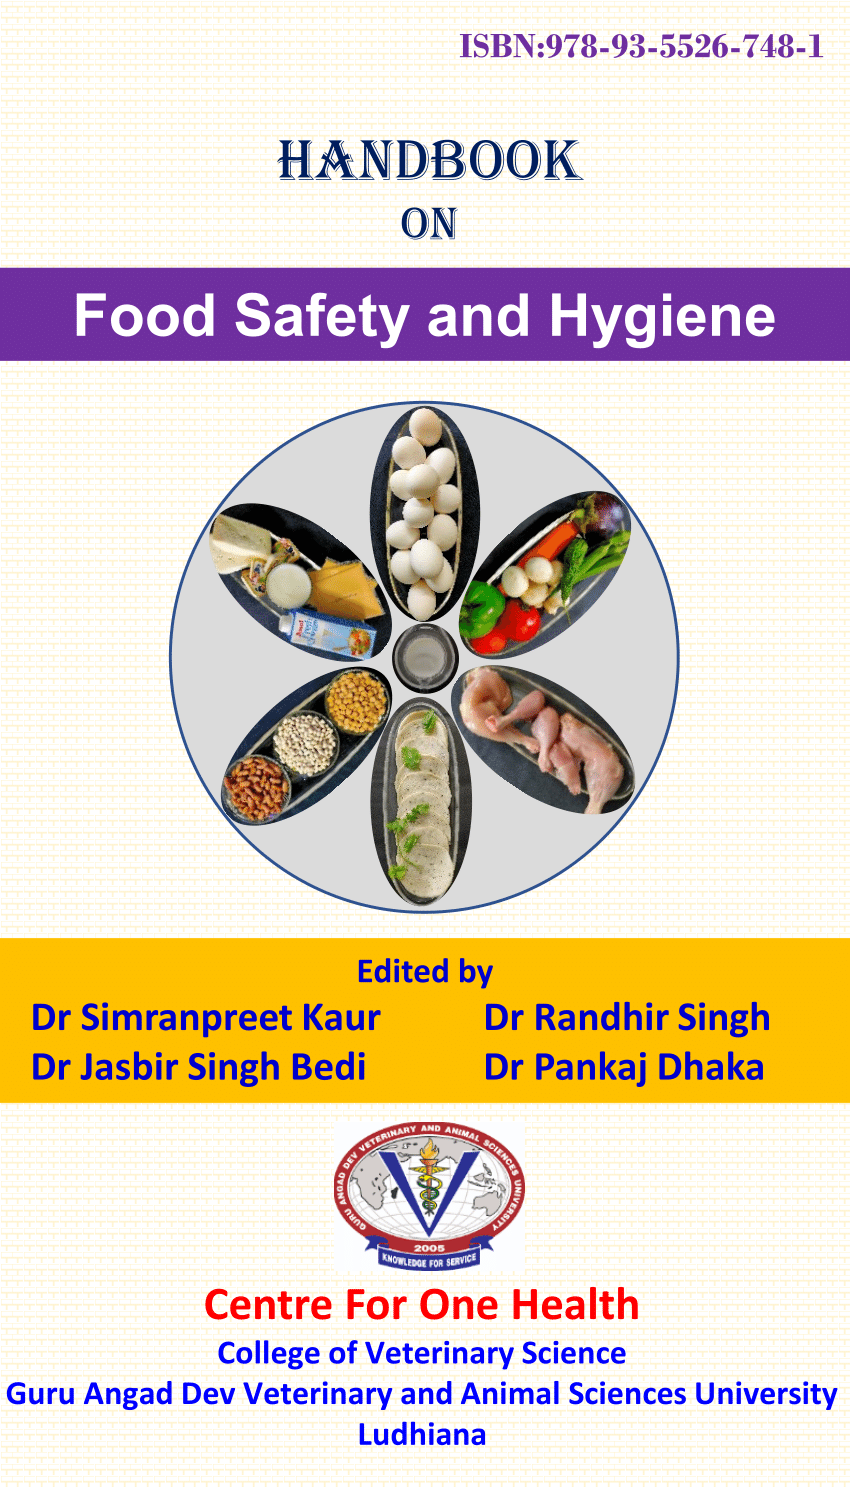 research topics on food safety and hygiene